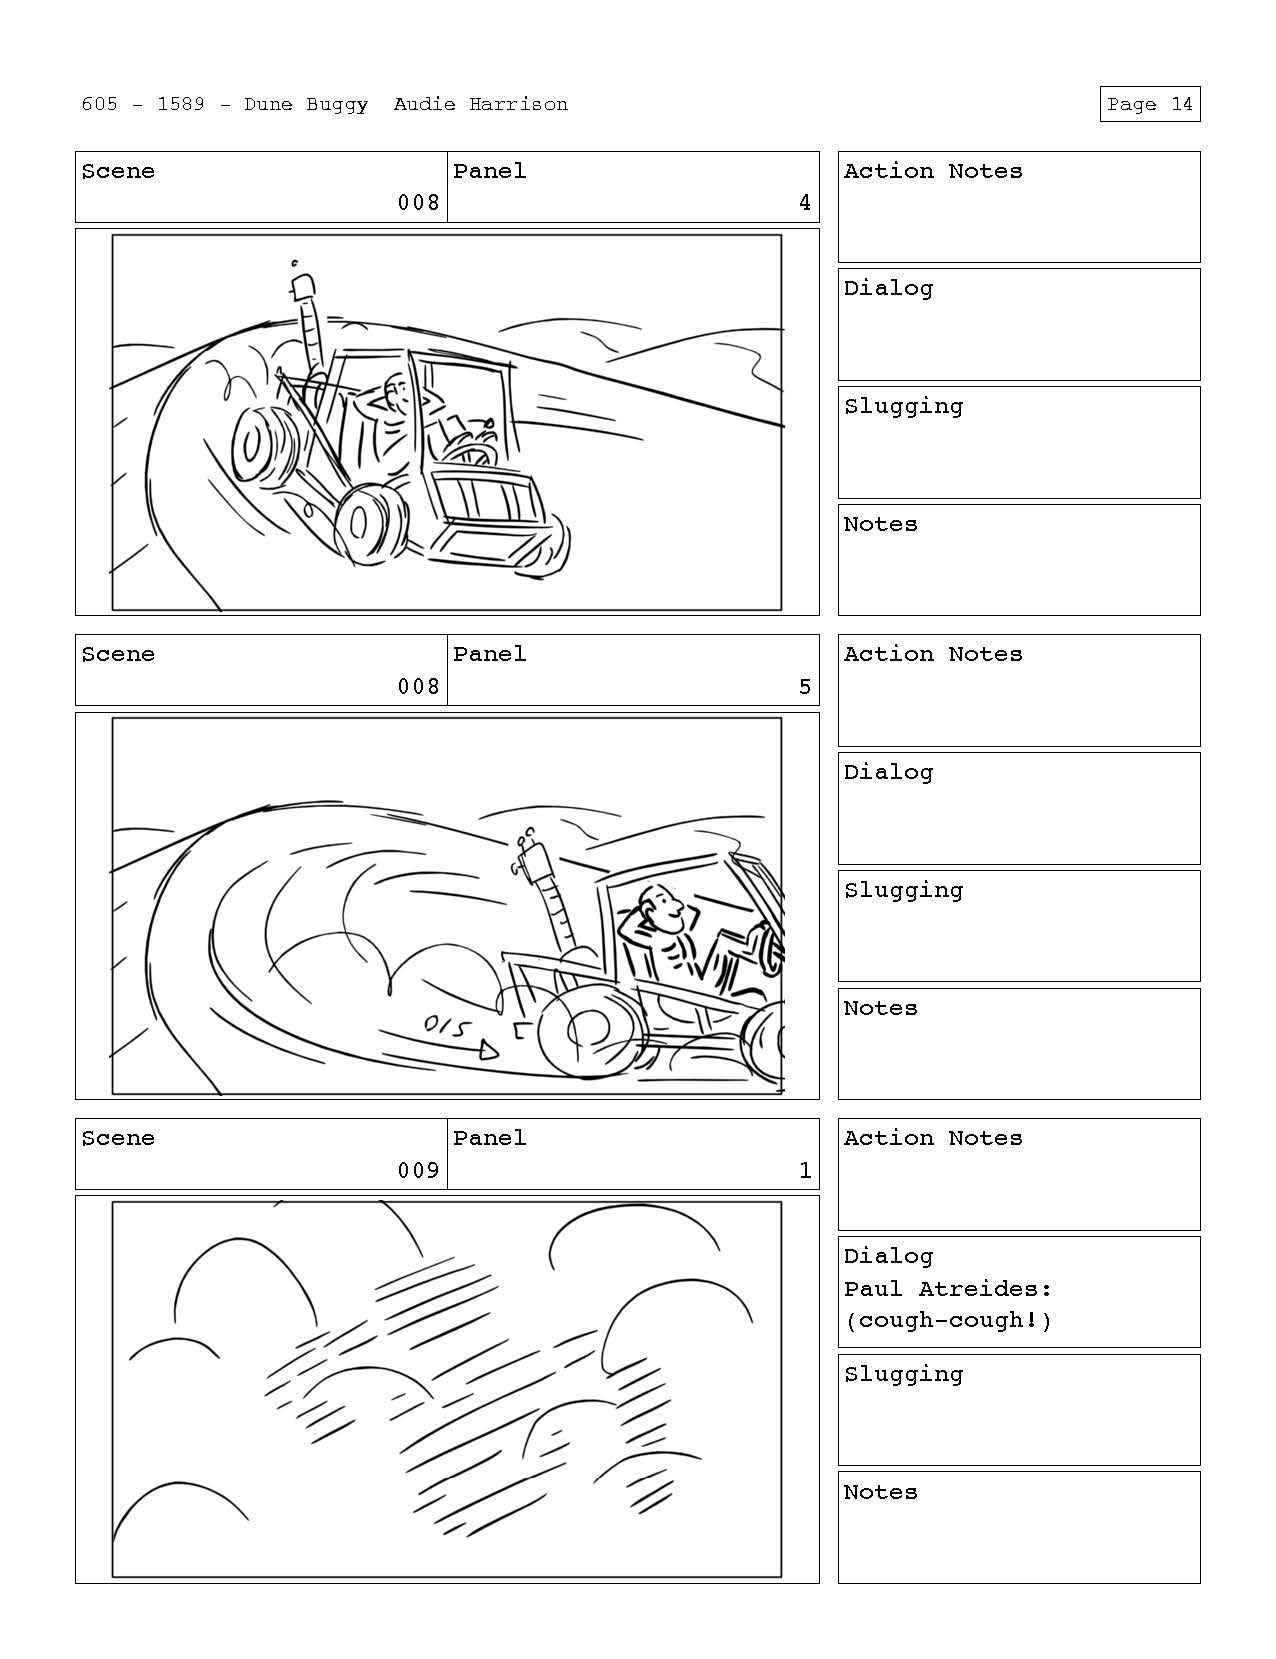 Dune_Buggy_Page_15.jpg